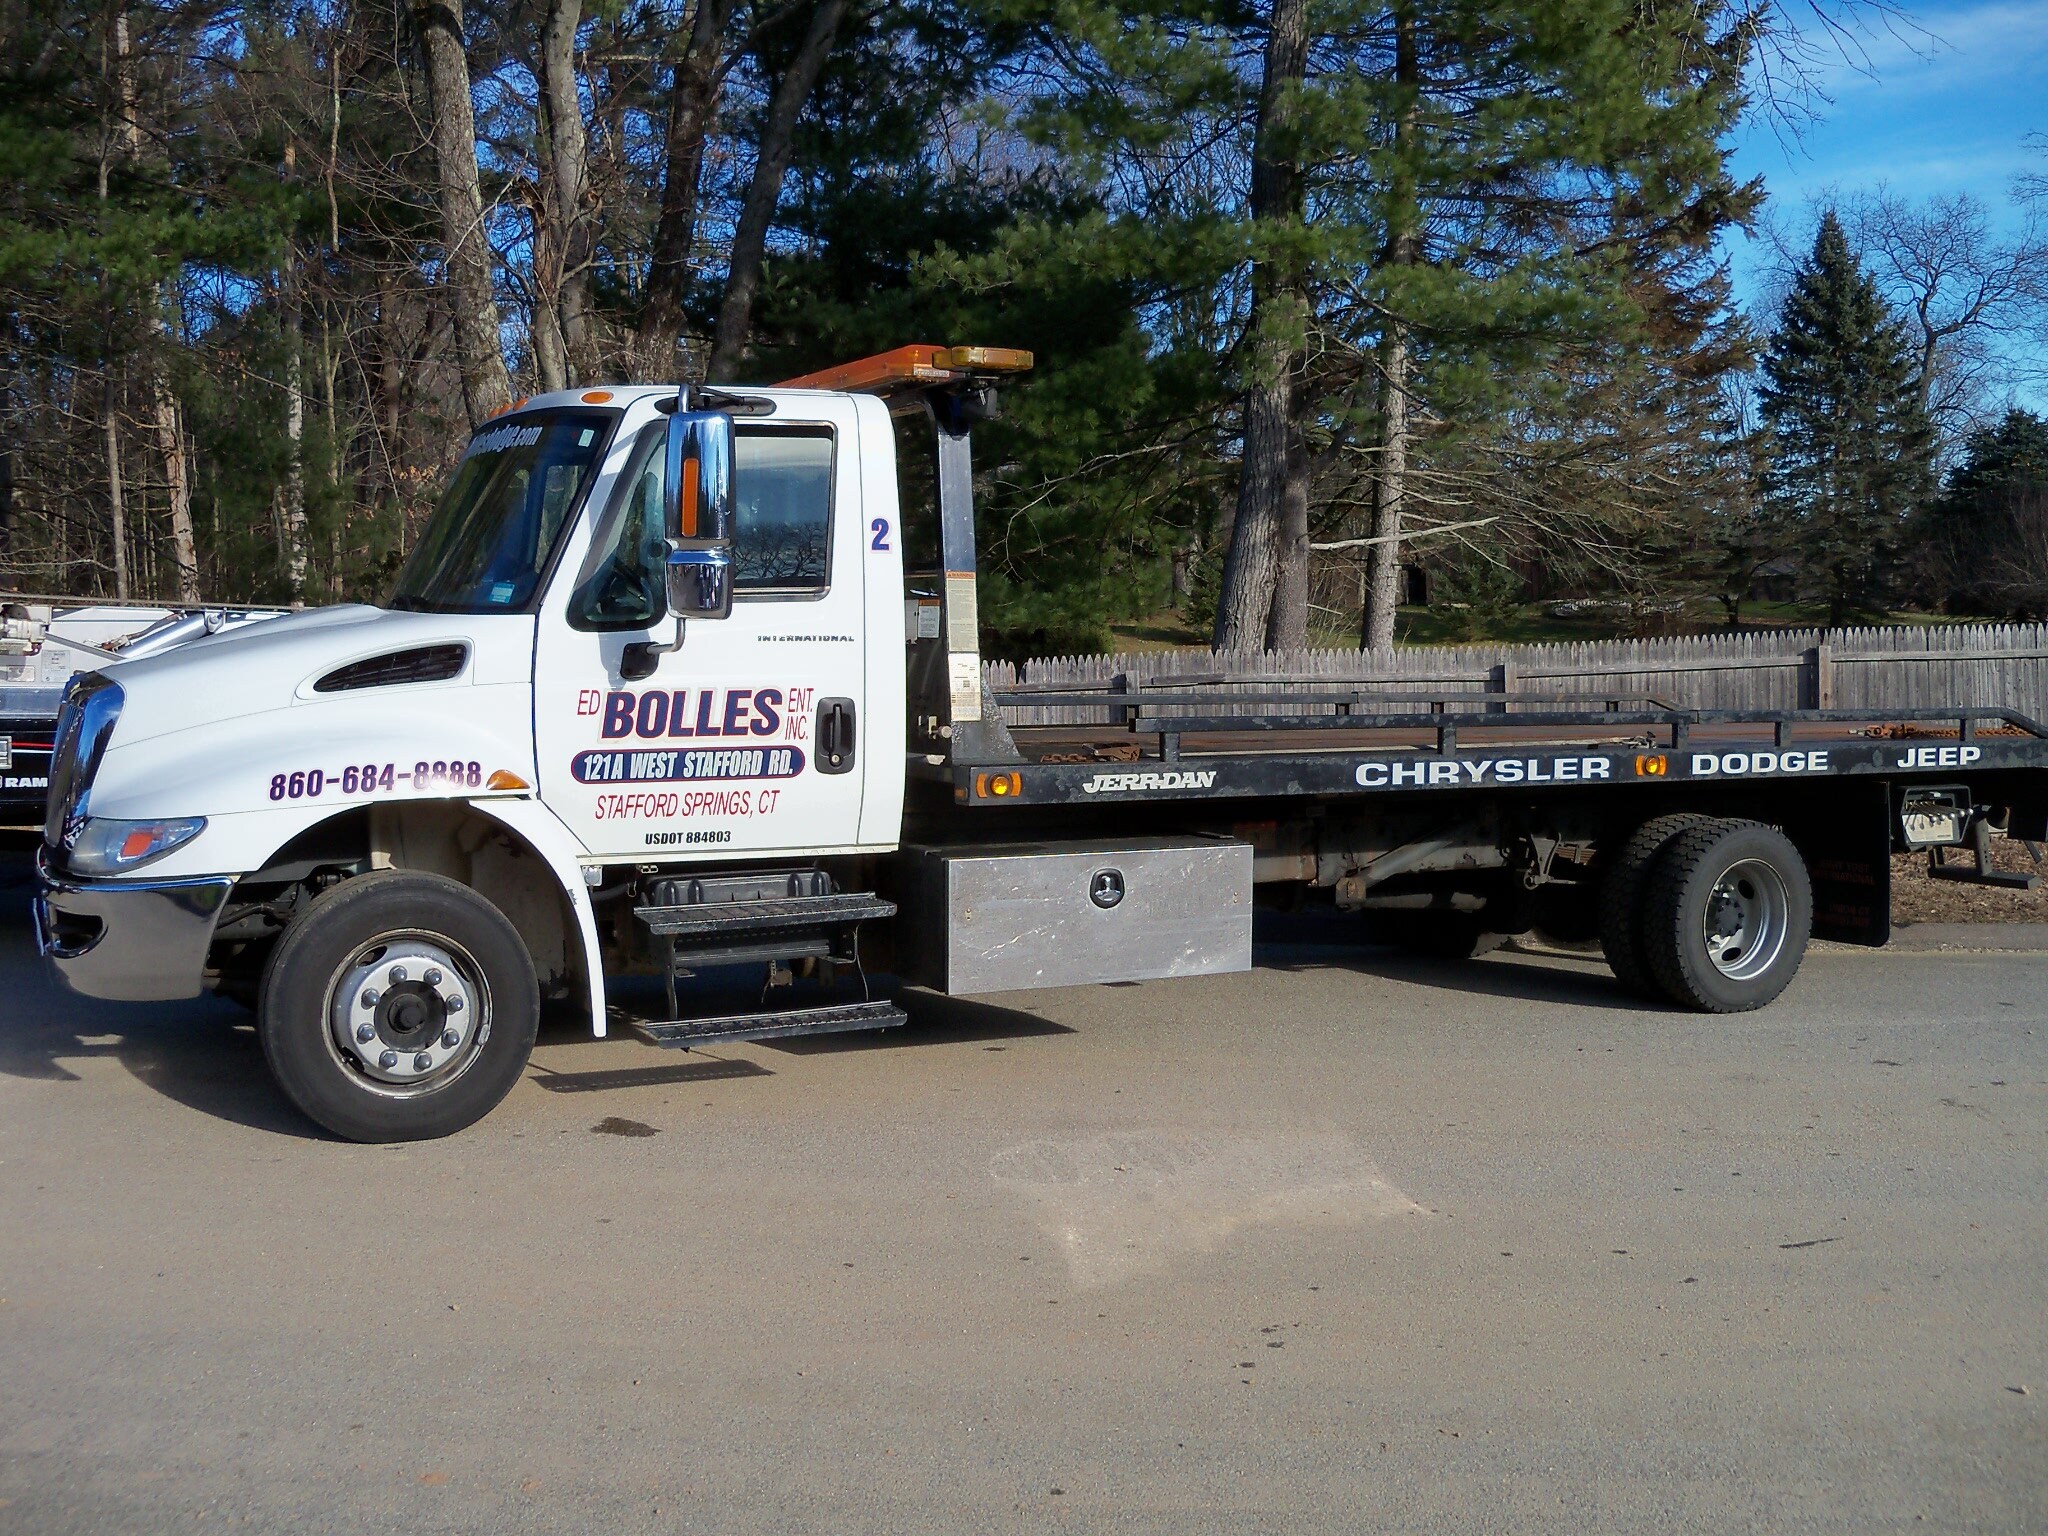 Towing Services | Bolles Chrysler Dodge Jeep in Stafford, CT